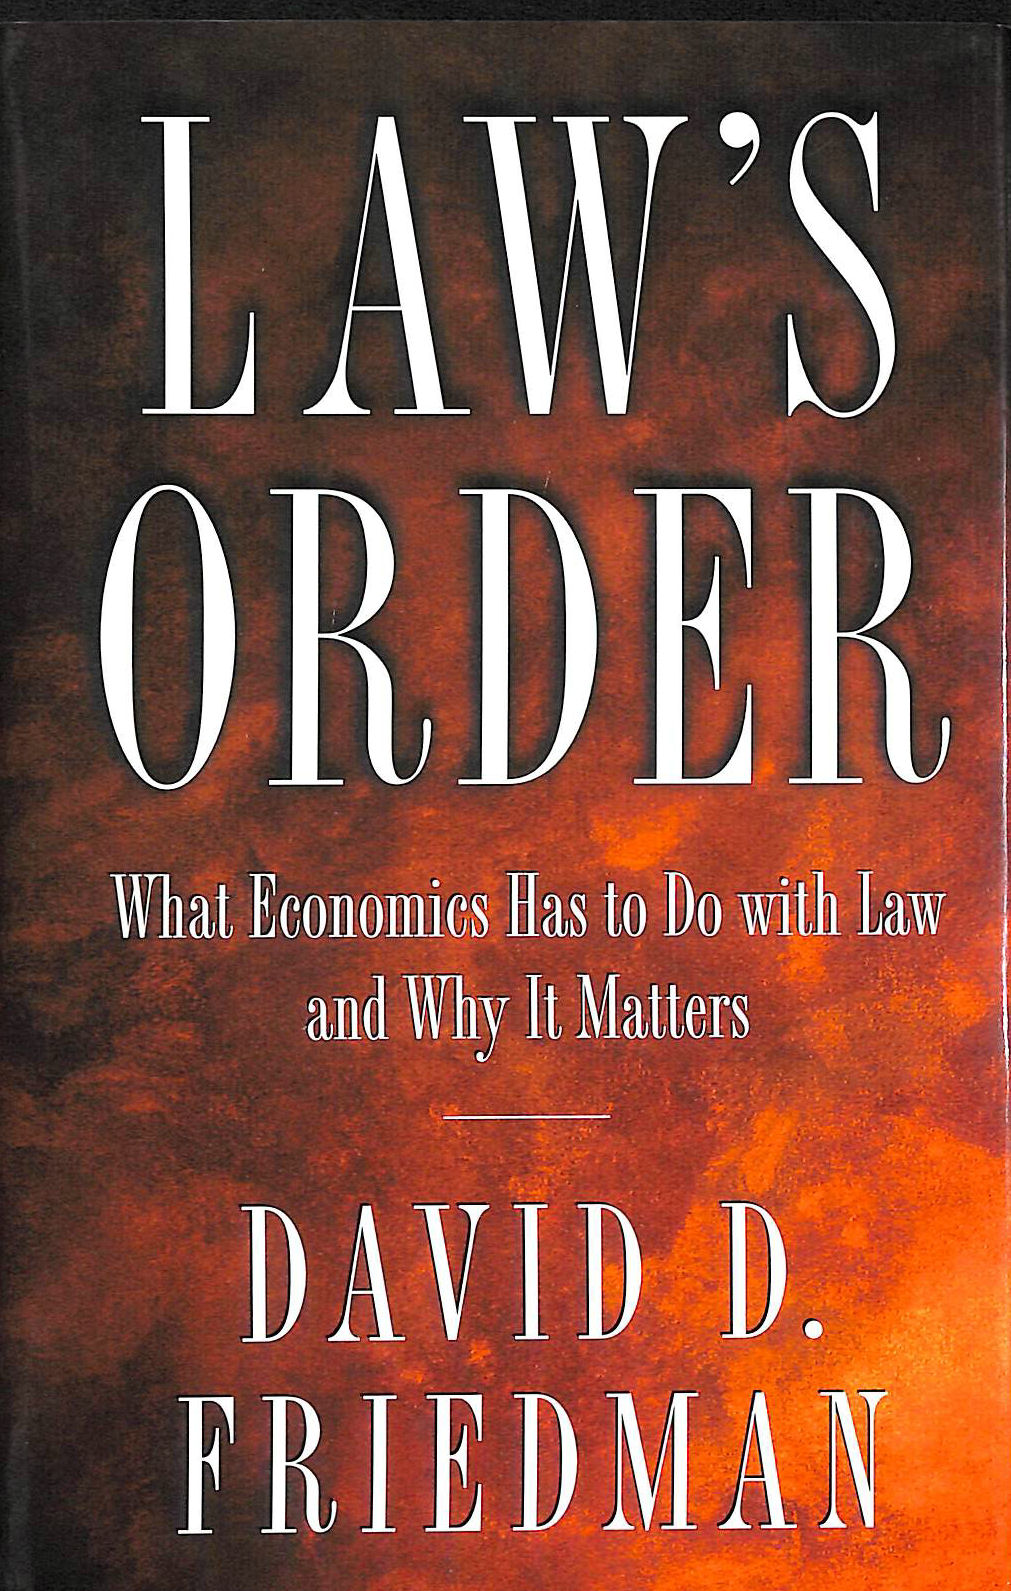 Law's Order, What Economics Has to Do with Law & Why it Matters: What Economics Has to Do with Law and Why It Matters - Friedman, David D.